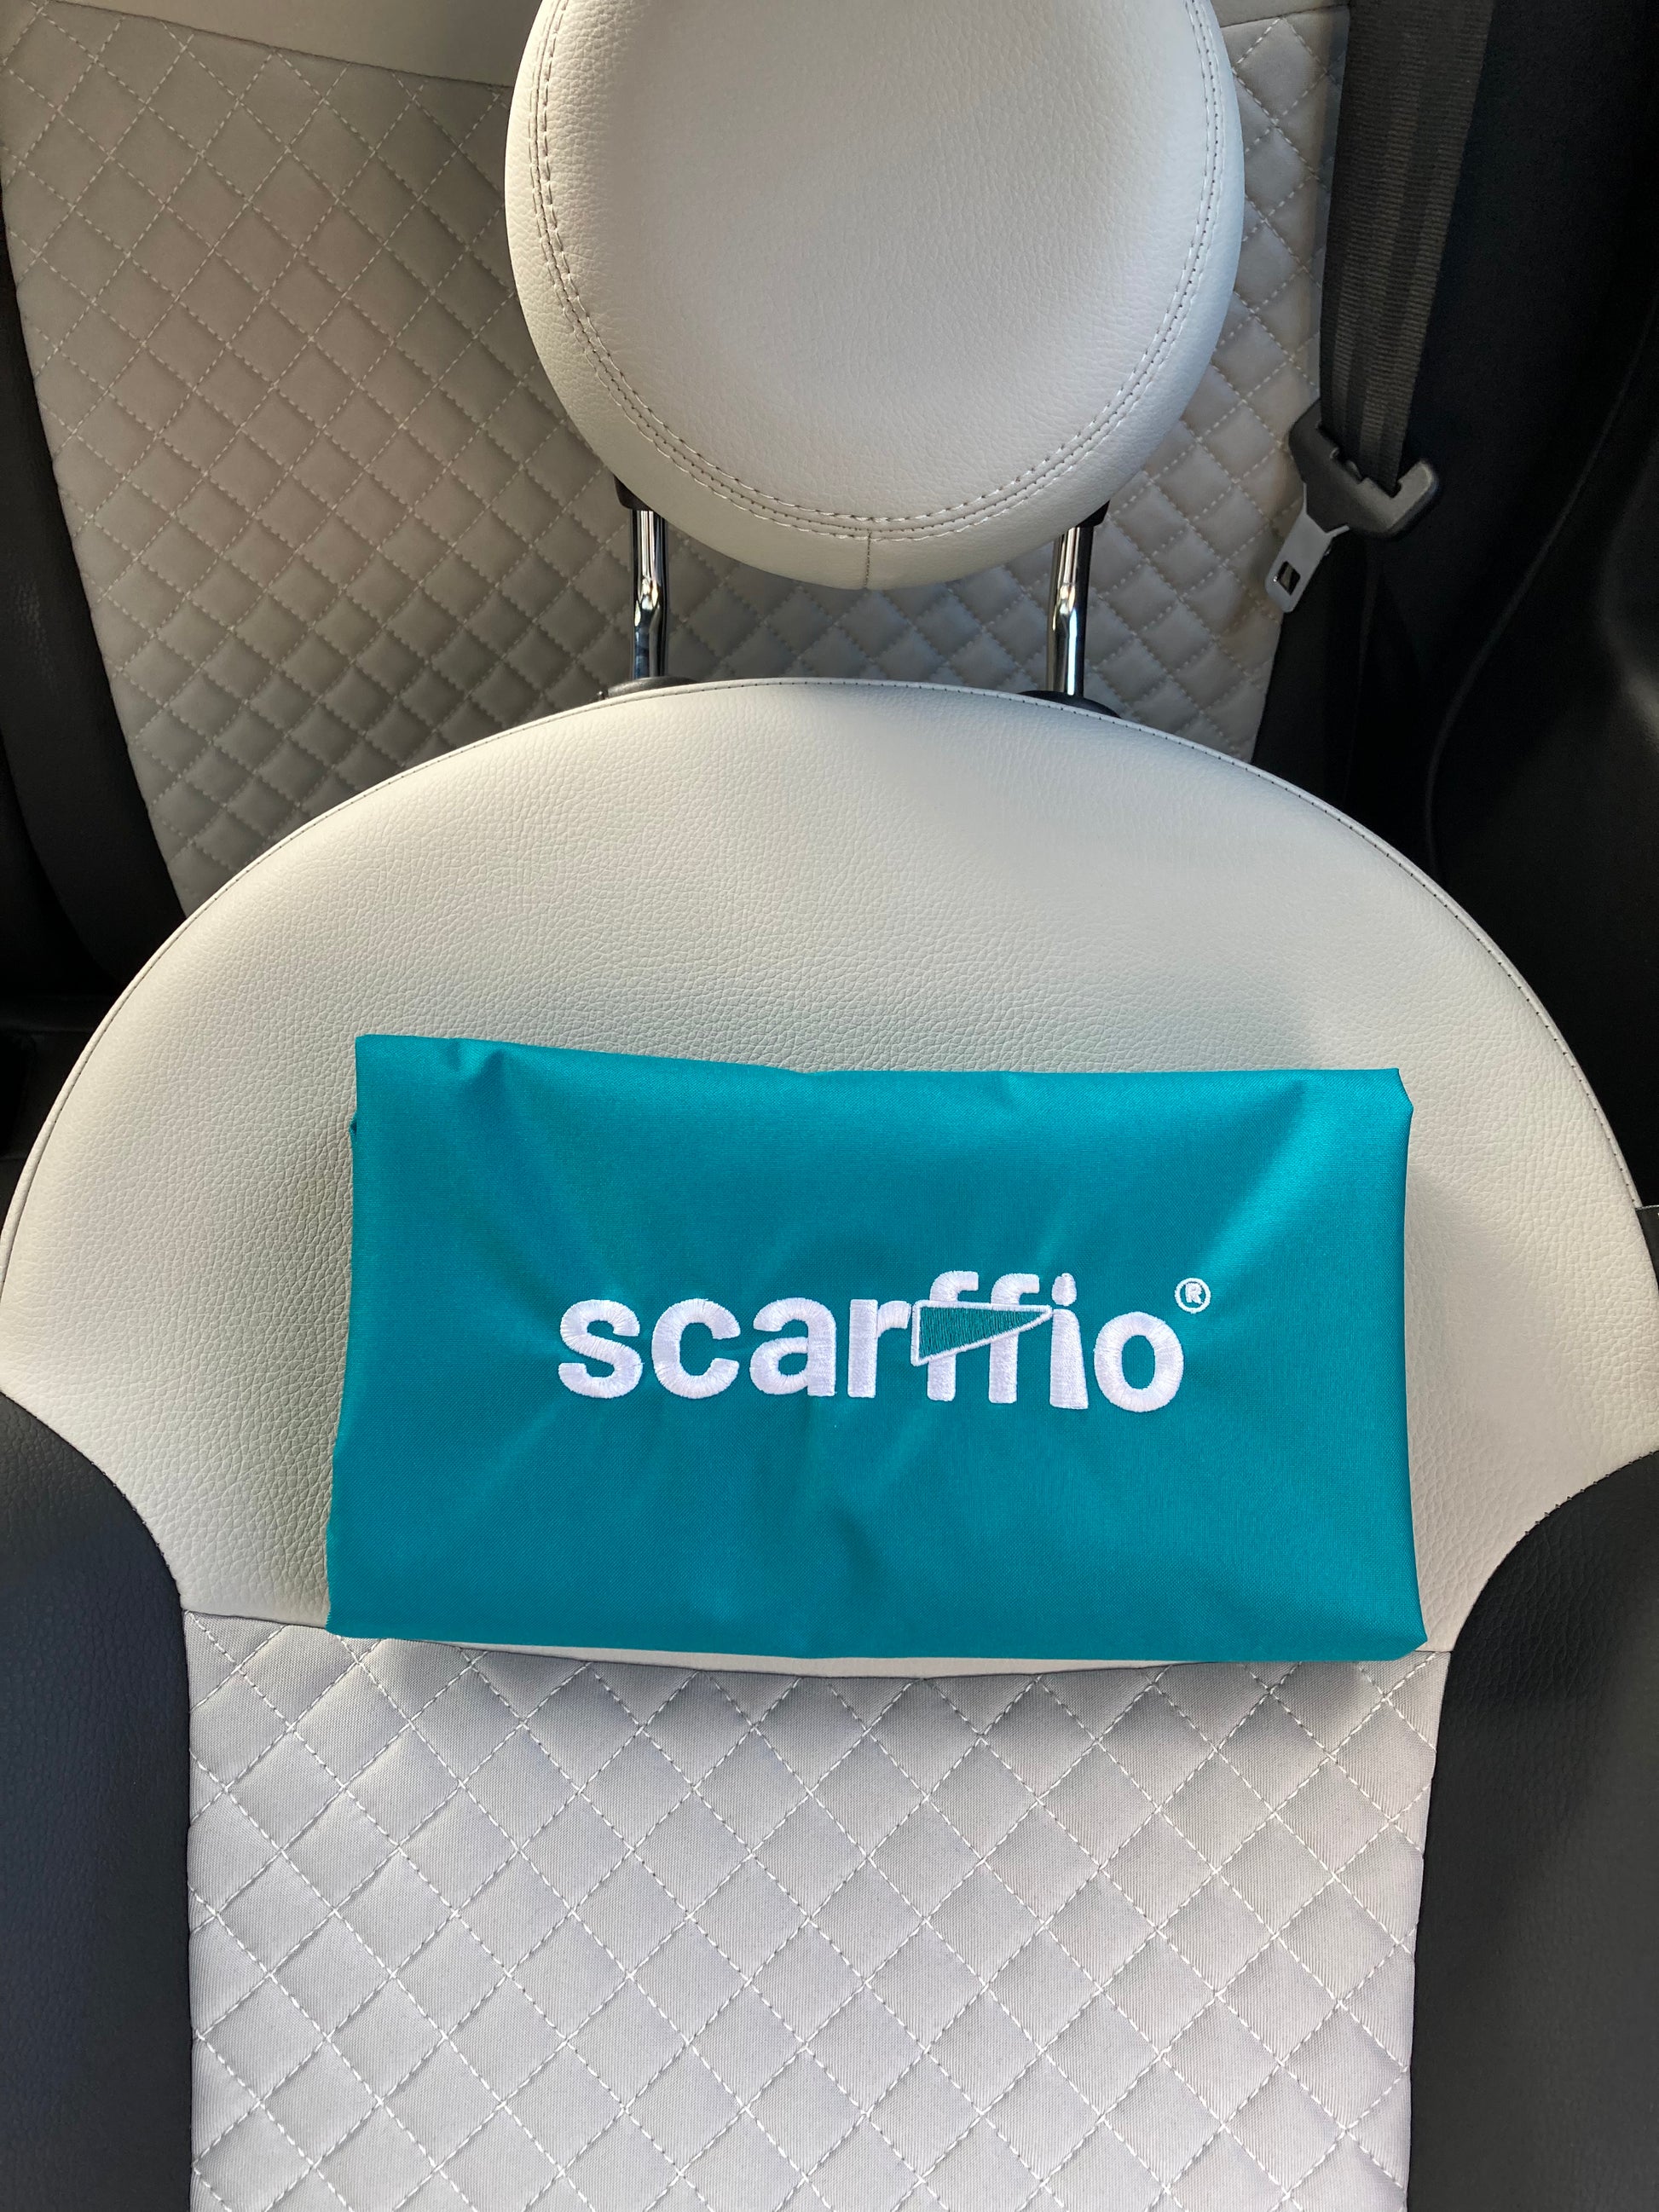 This image shows a a folded Wild Teal scarffio®, resting on a cream and black quilted car seat. The focus of the image is  the white embroidered scarffio®  logo with its' matching Teal cape detail. 